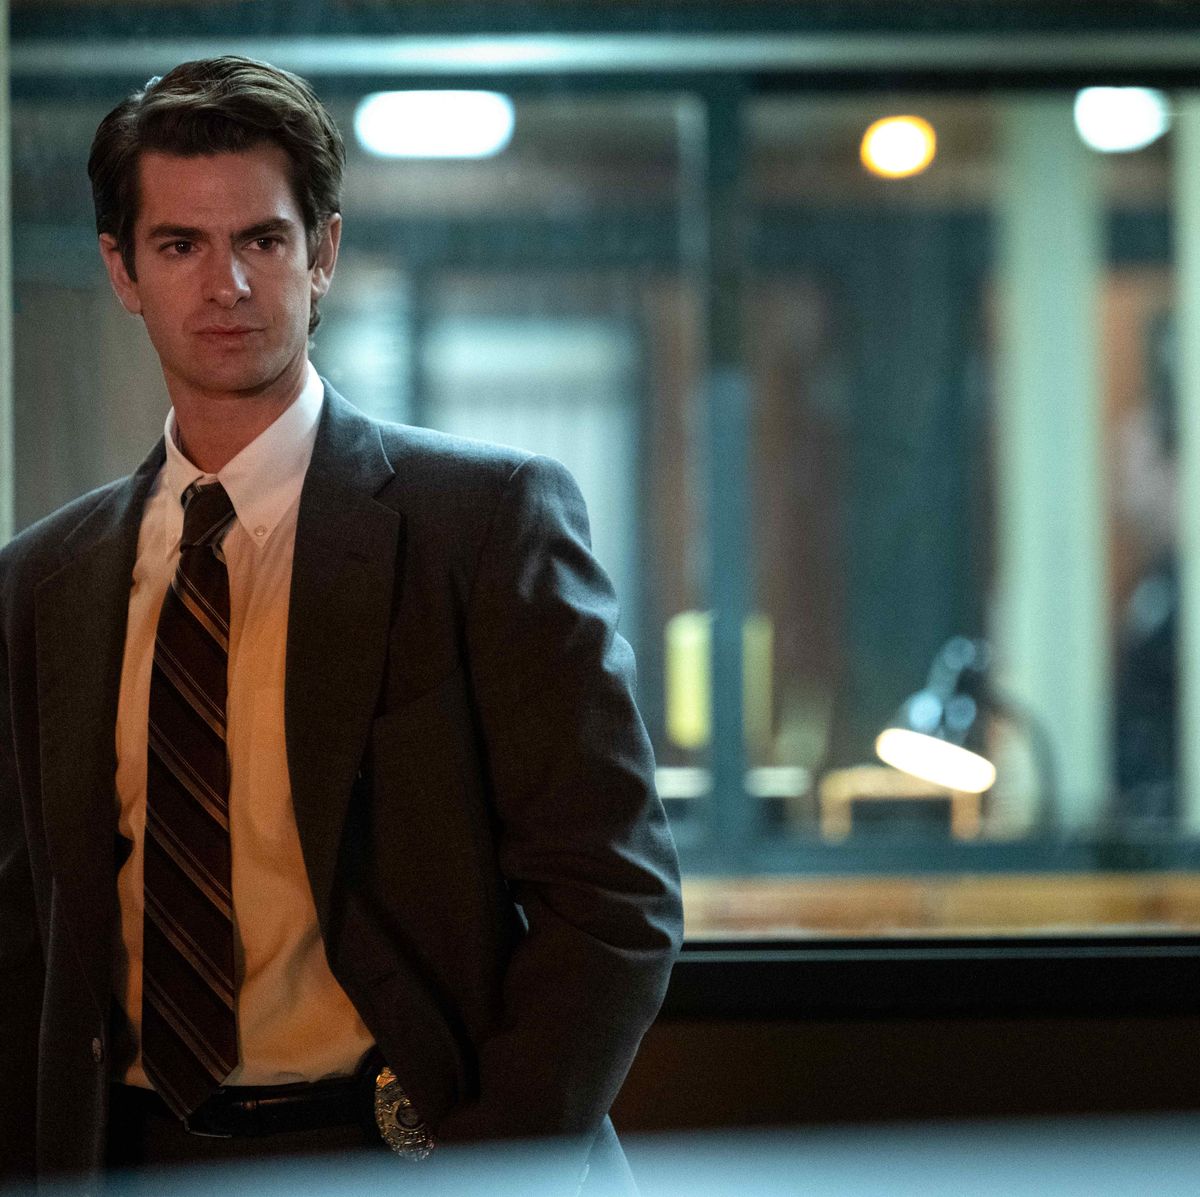 Andrew Garfield on 'Under the Banner of Heaven' and Taking a Break